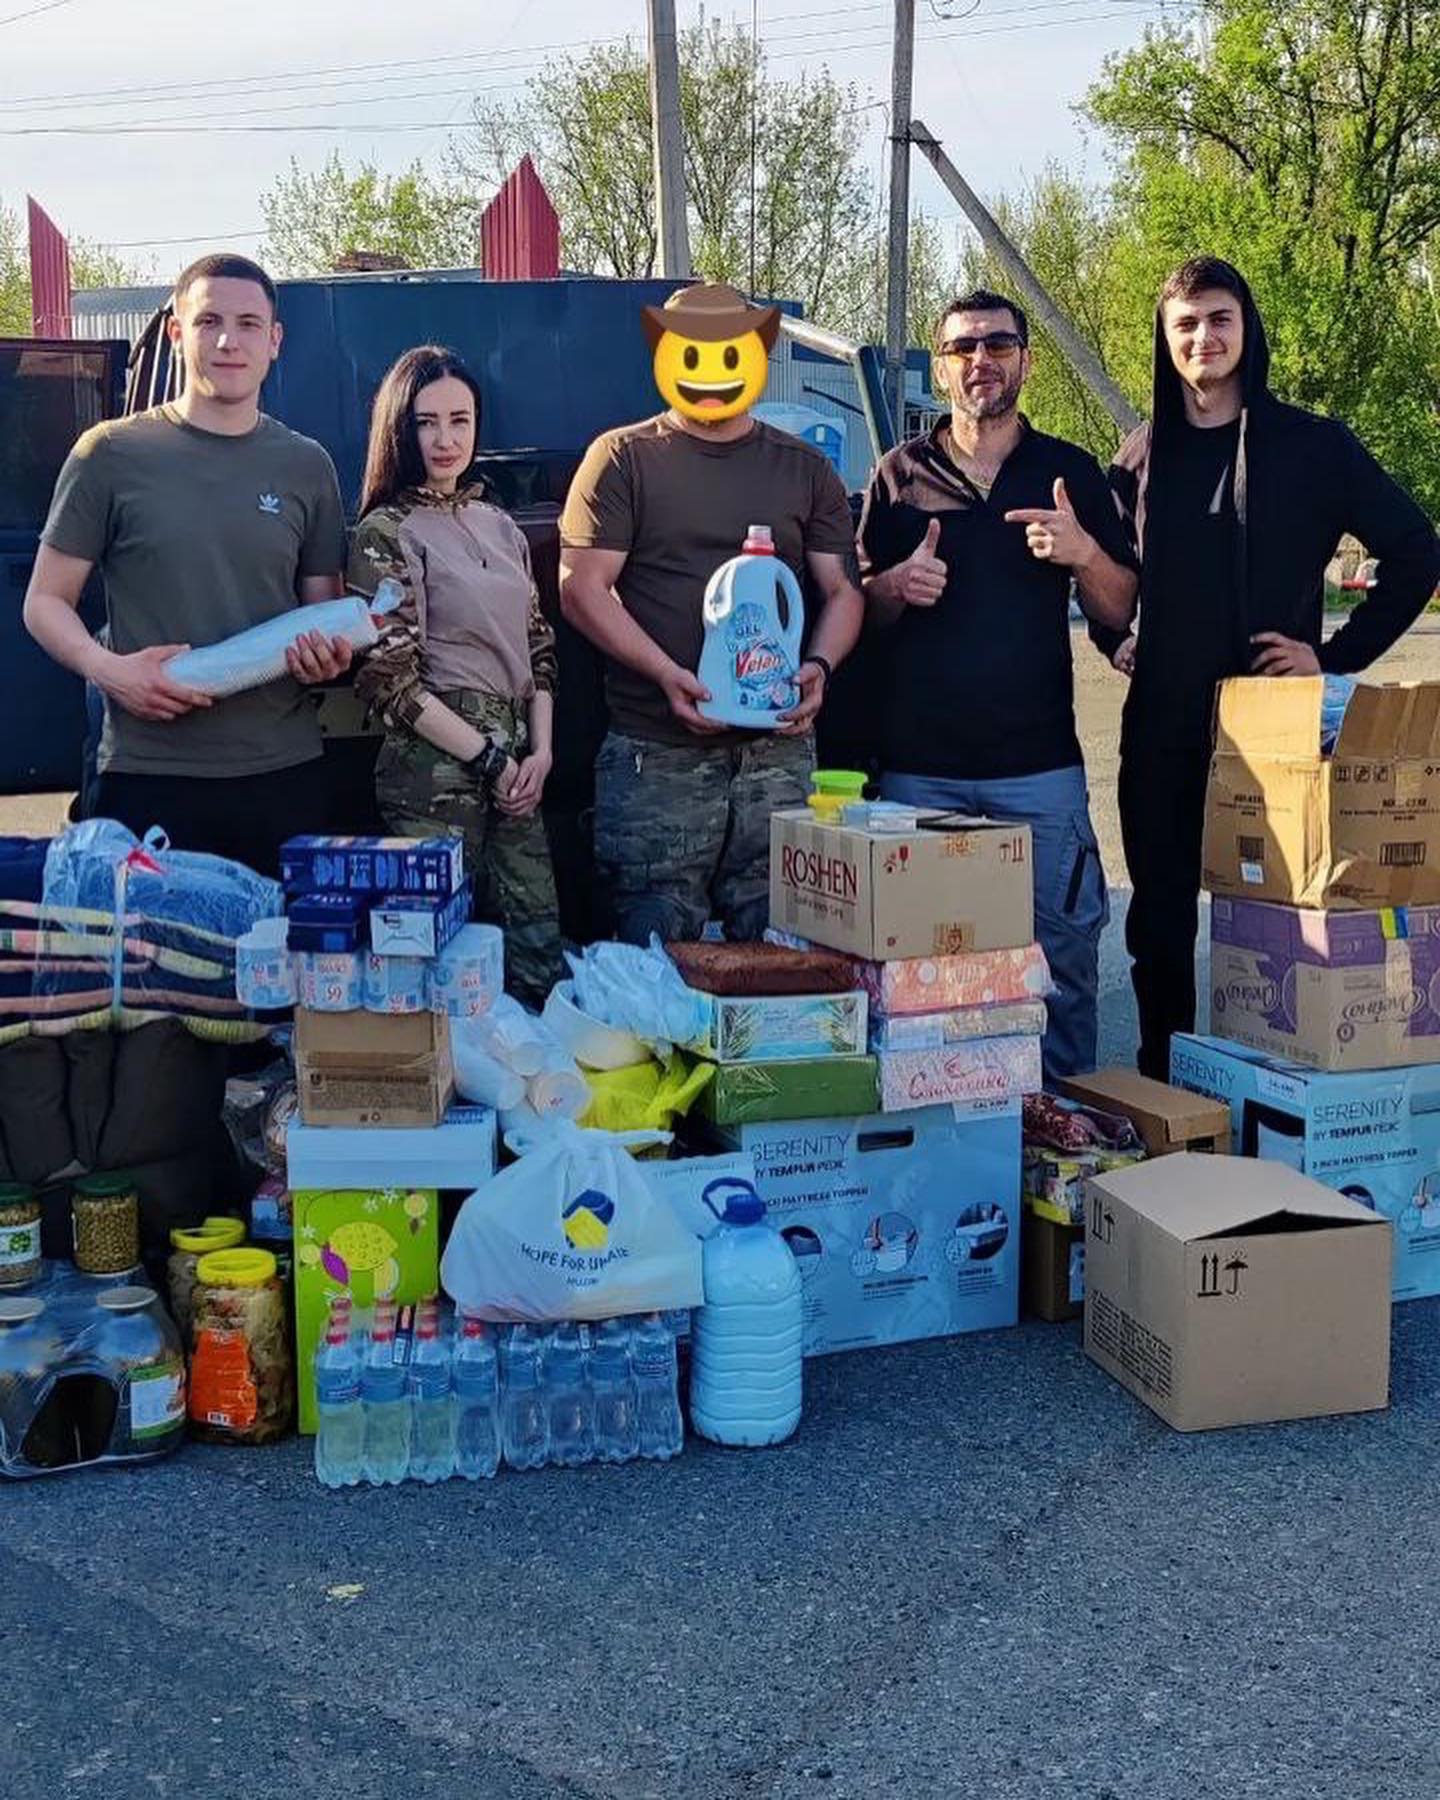 Group of volunteers with supplies such as food, water, and household items, smiling and posing for a photo outdoors in support of Ukraine relief efforts. One person's face is covered with a smiley face